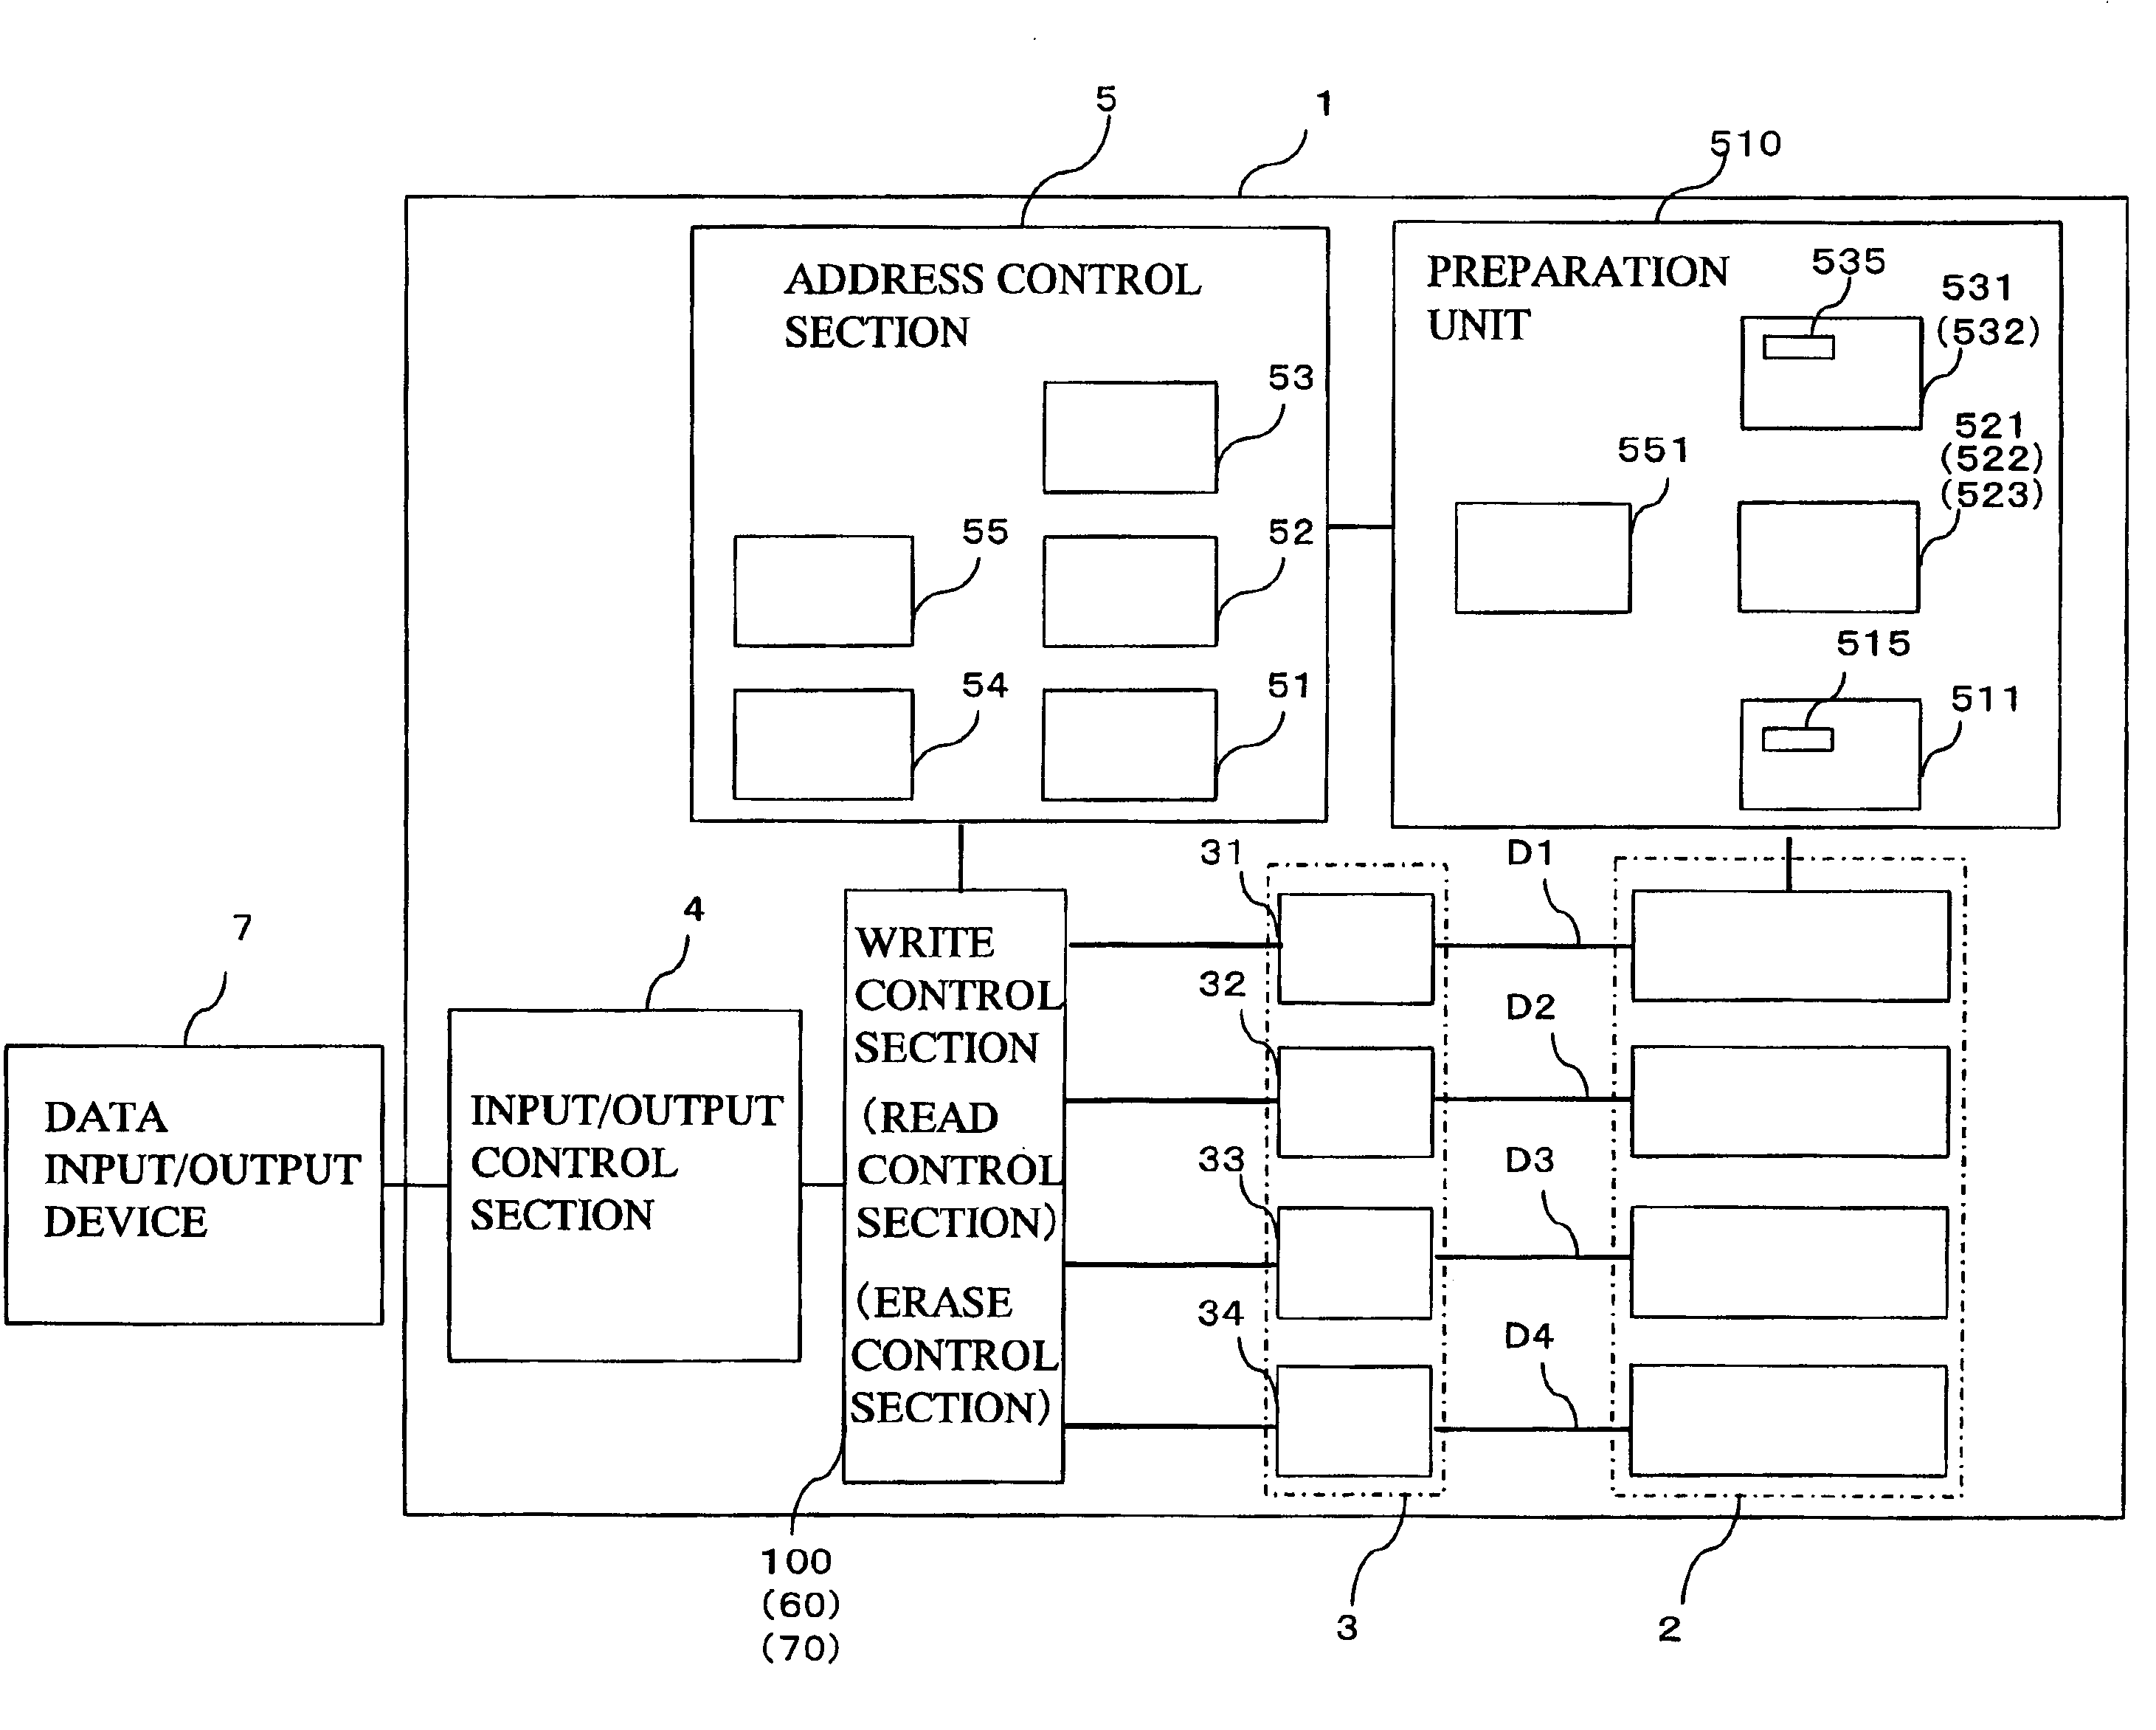 Address conversion unit for memory device